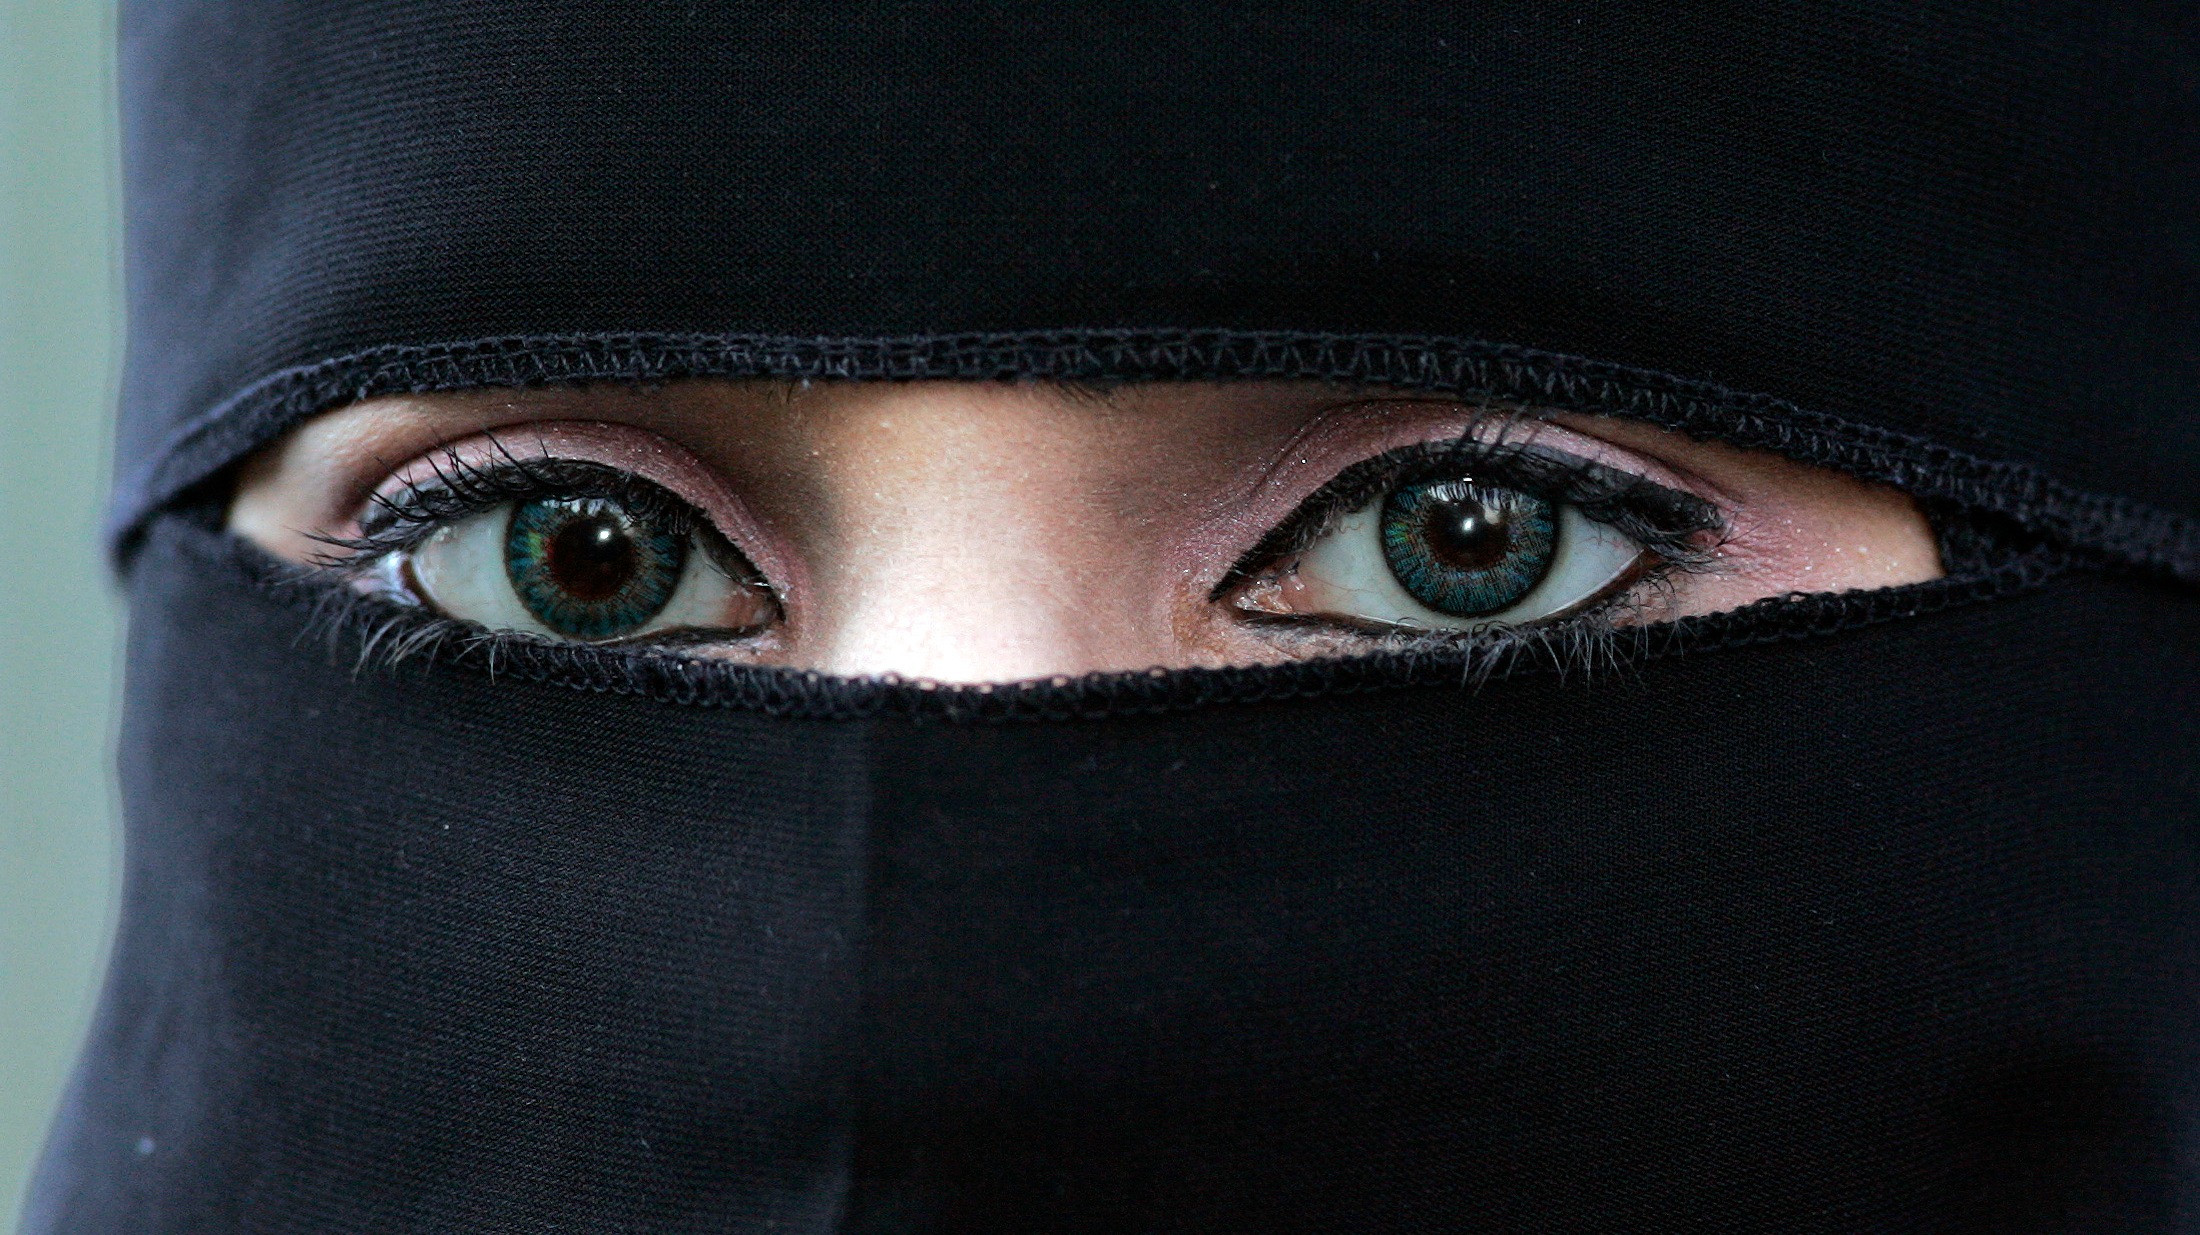 Student banned from wearing niqab in German school | ITV News